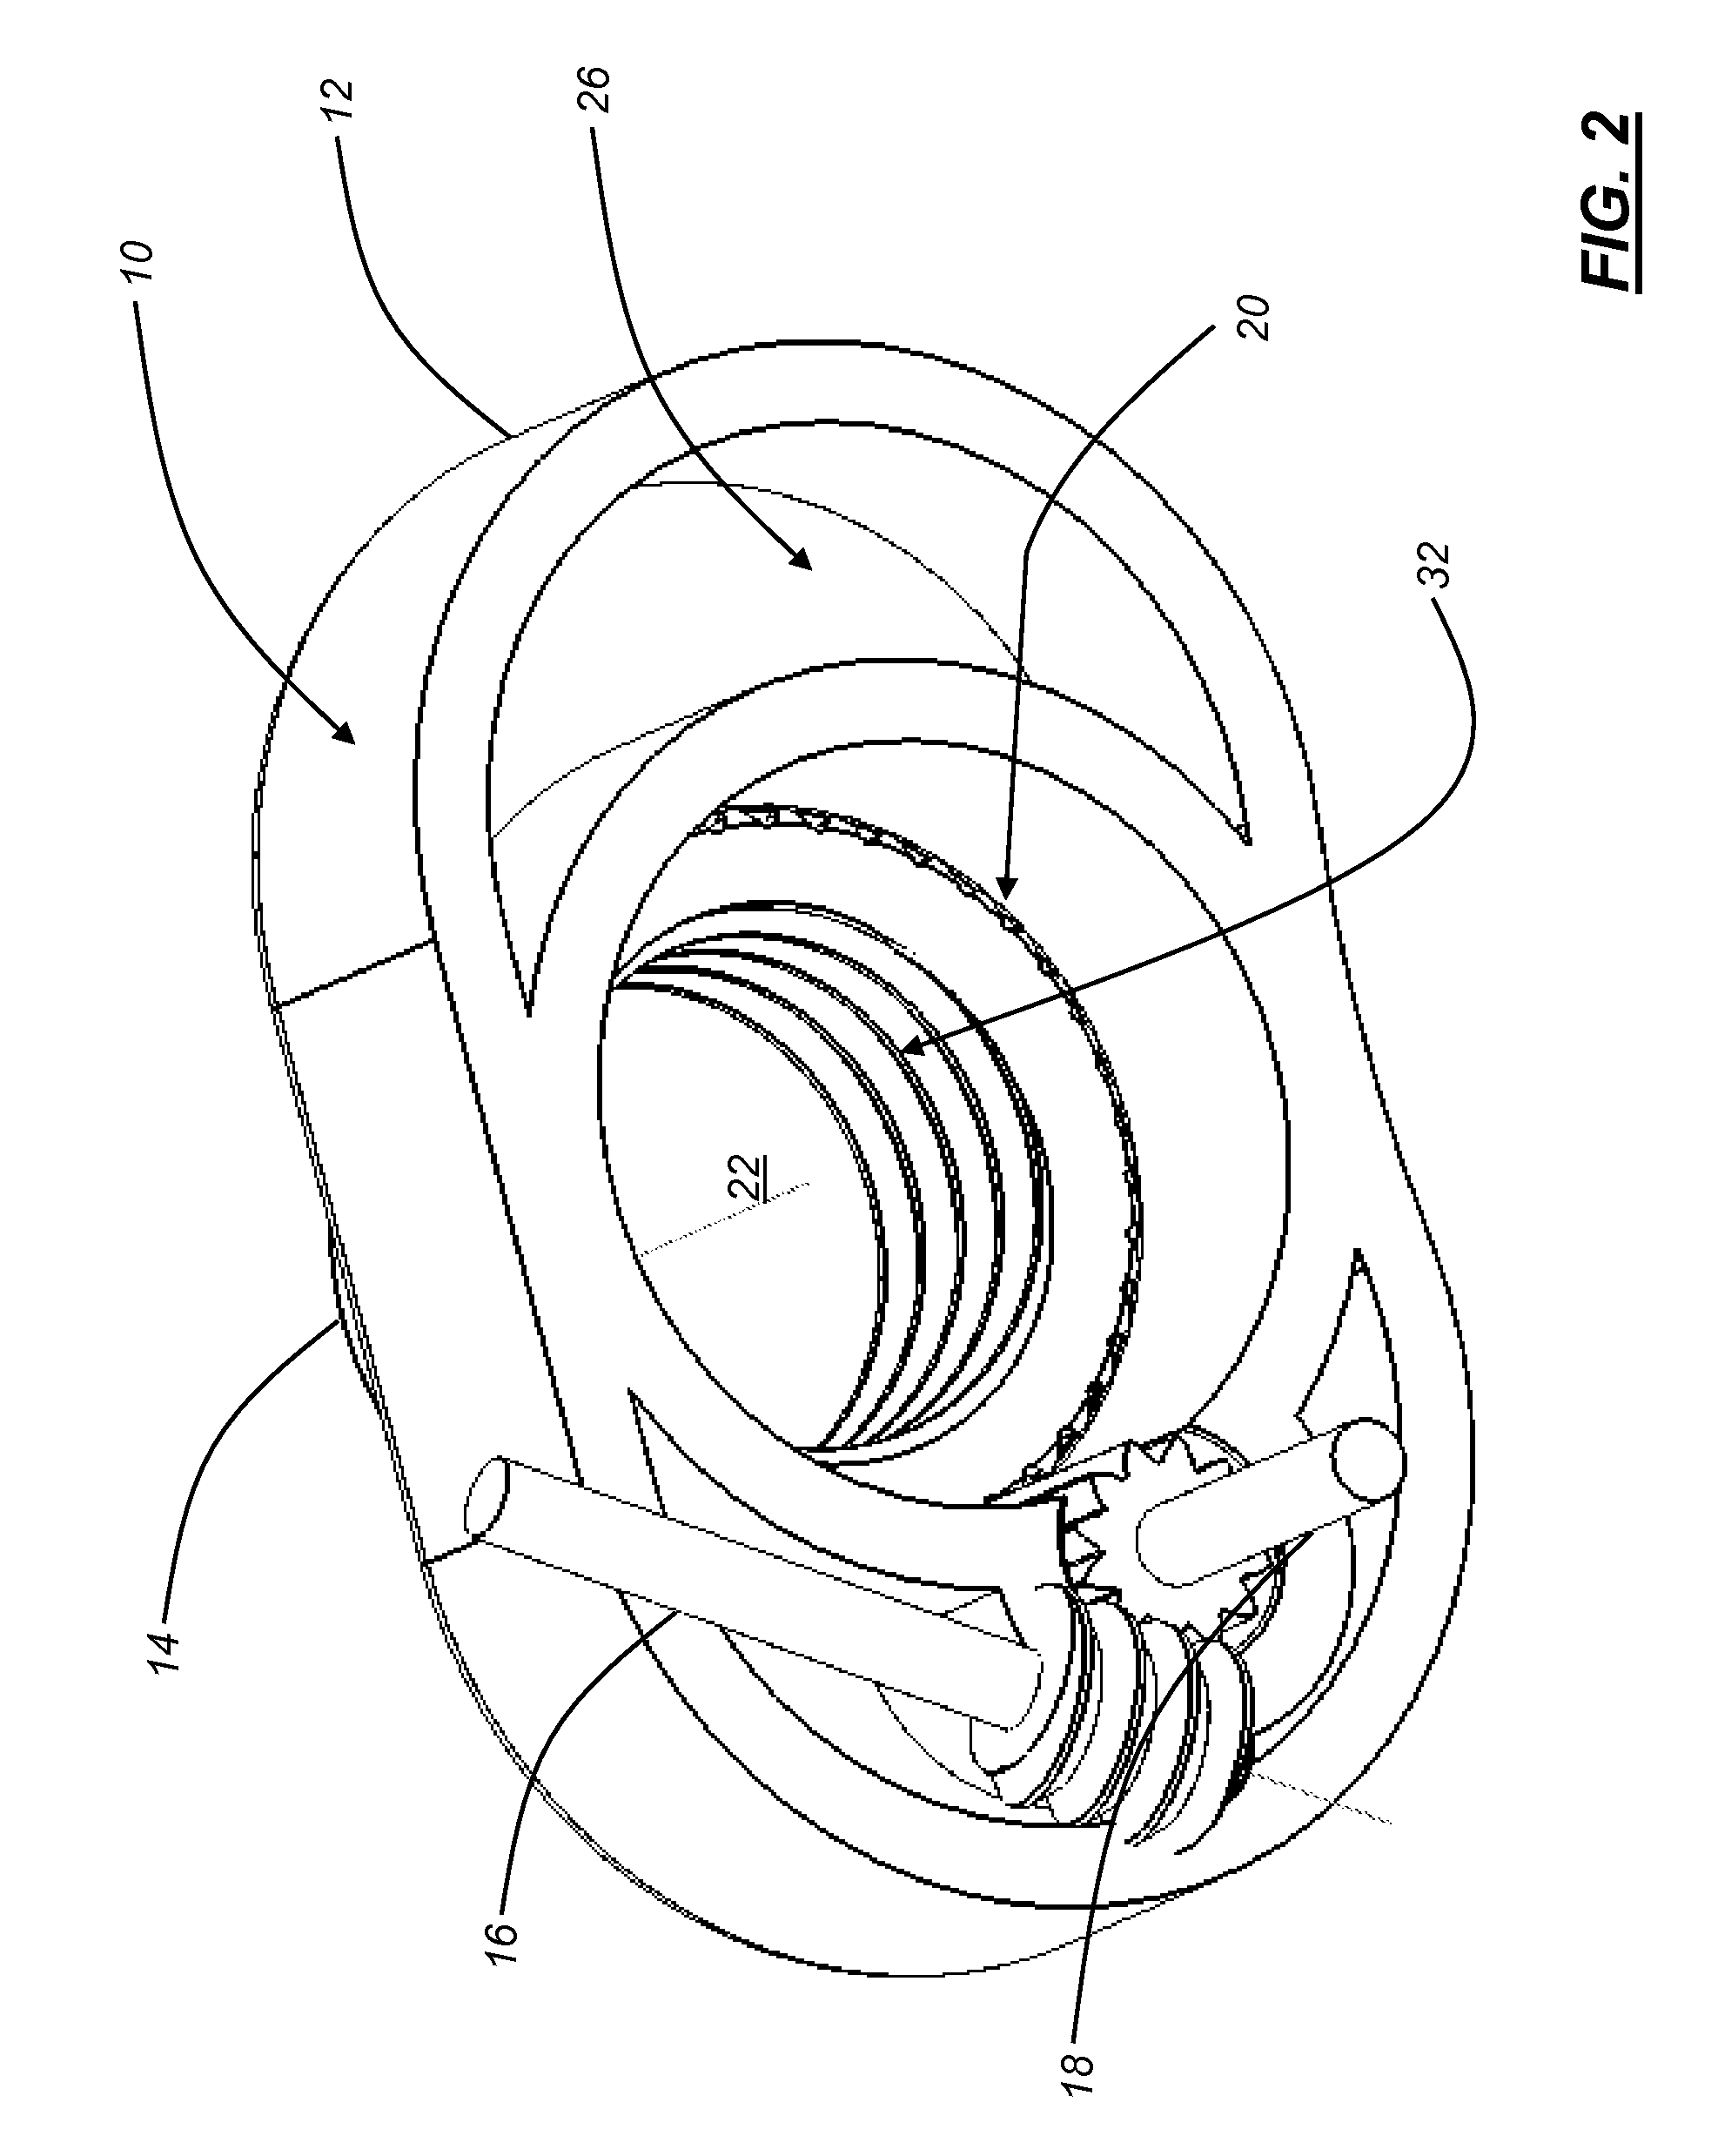 Anterior lumbar interbody fusion cage device and associated method